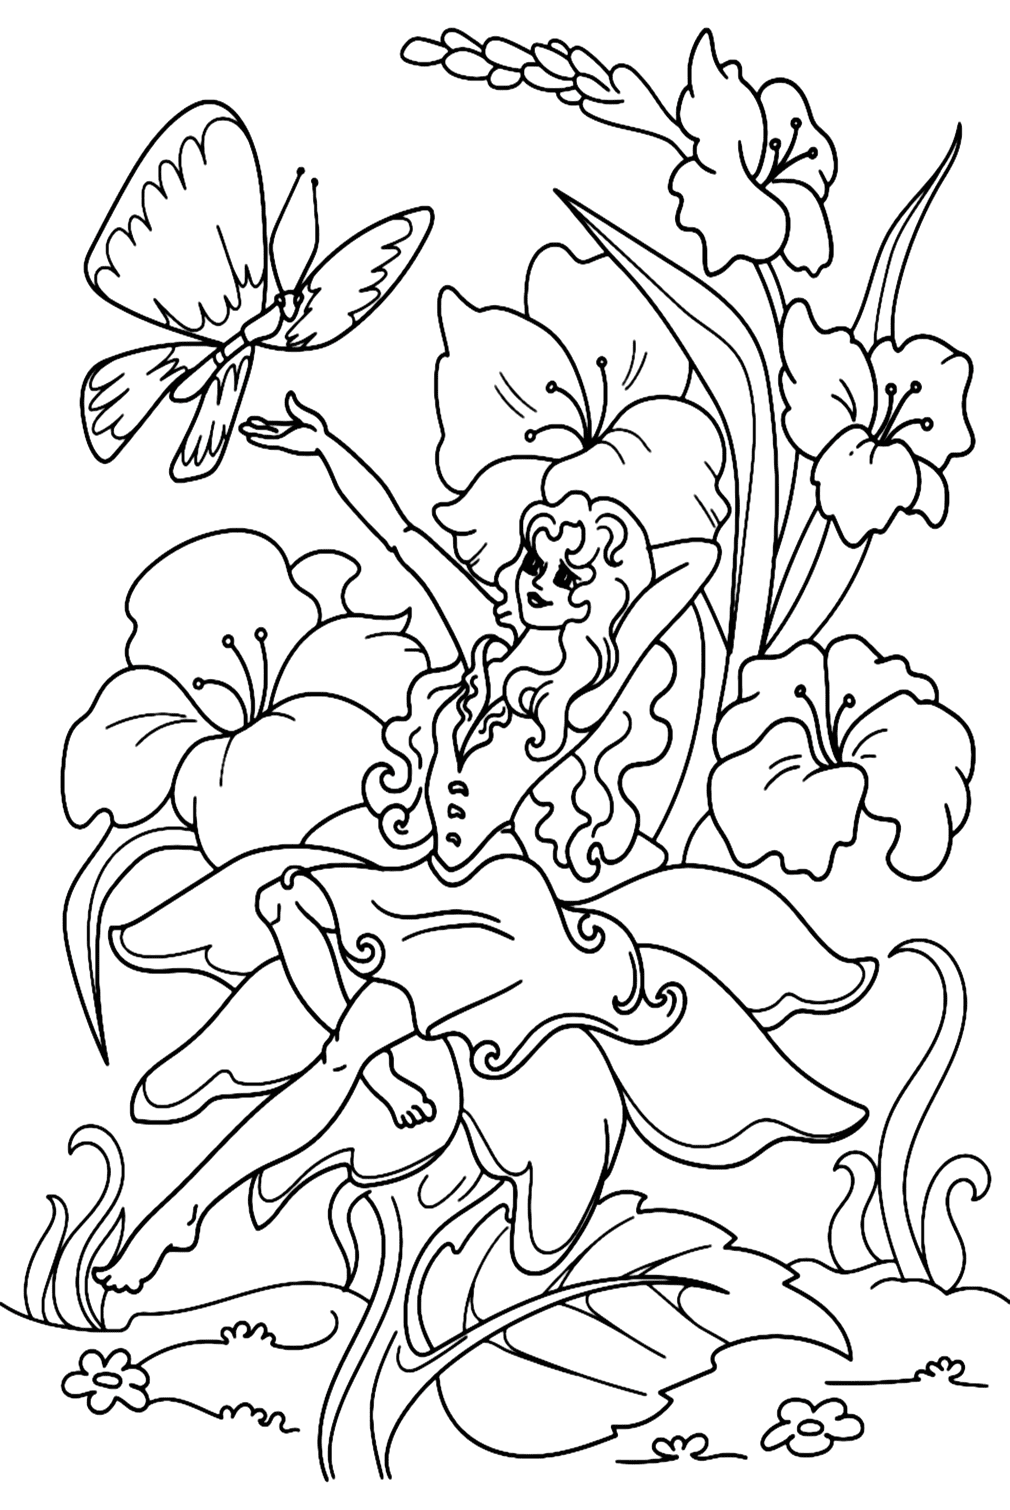 Fairy Garden Coloring Page from Fairy